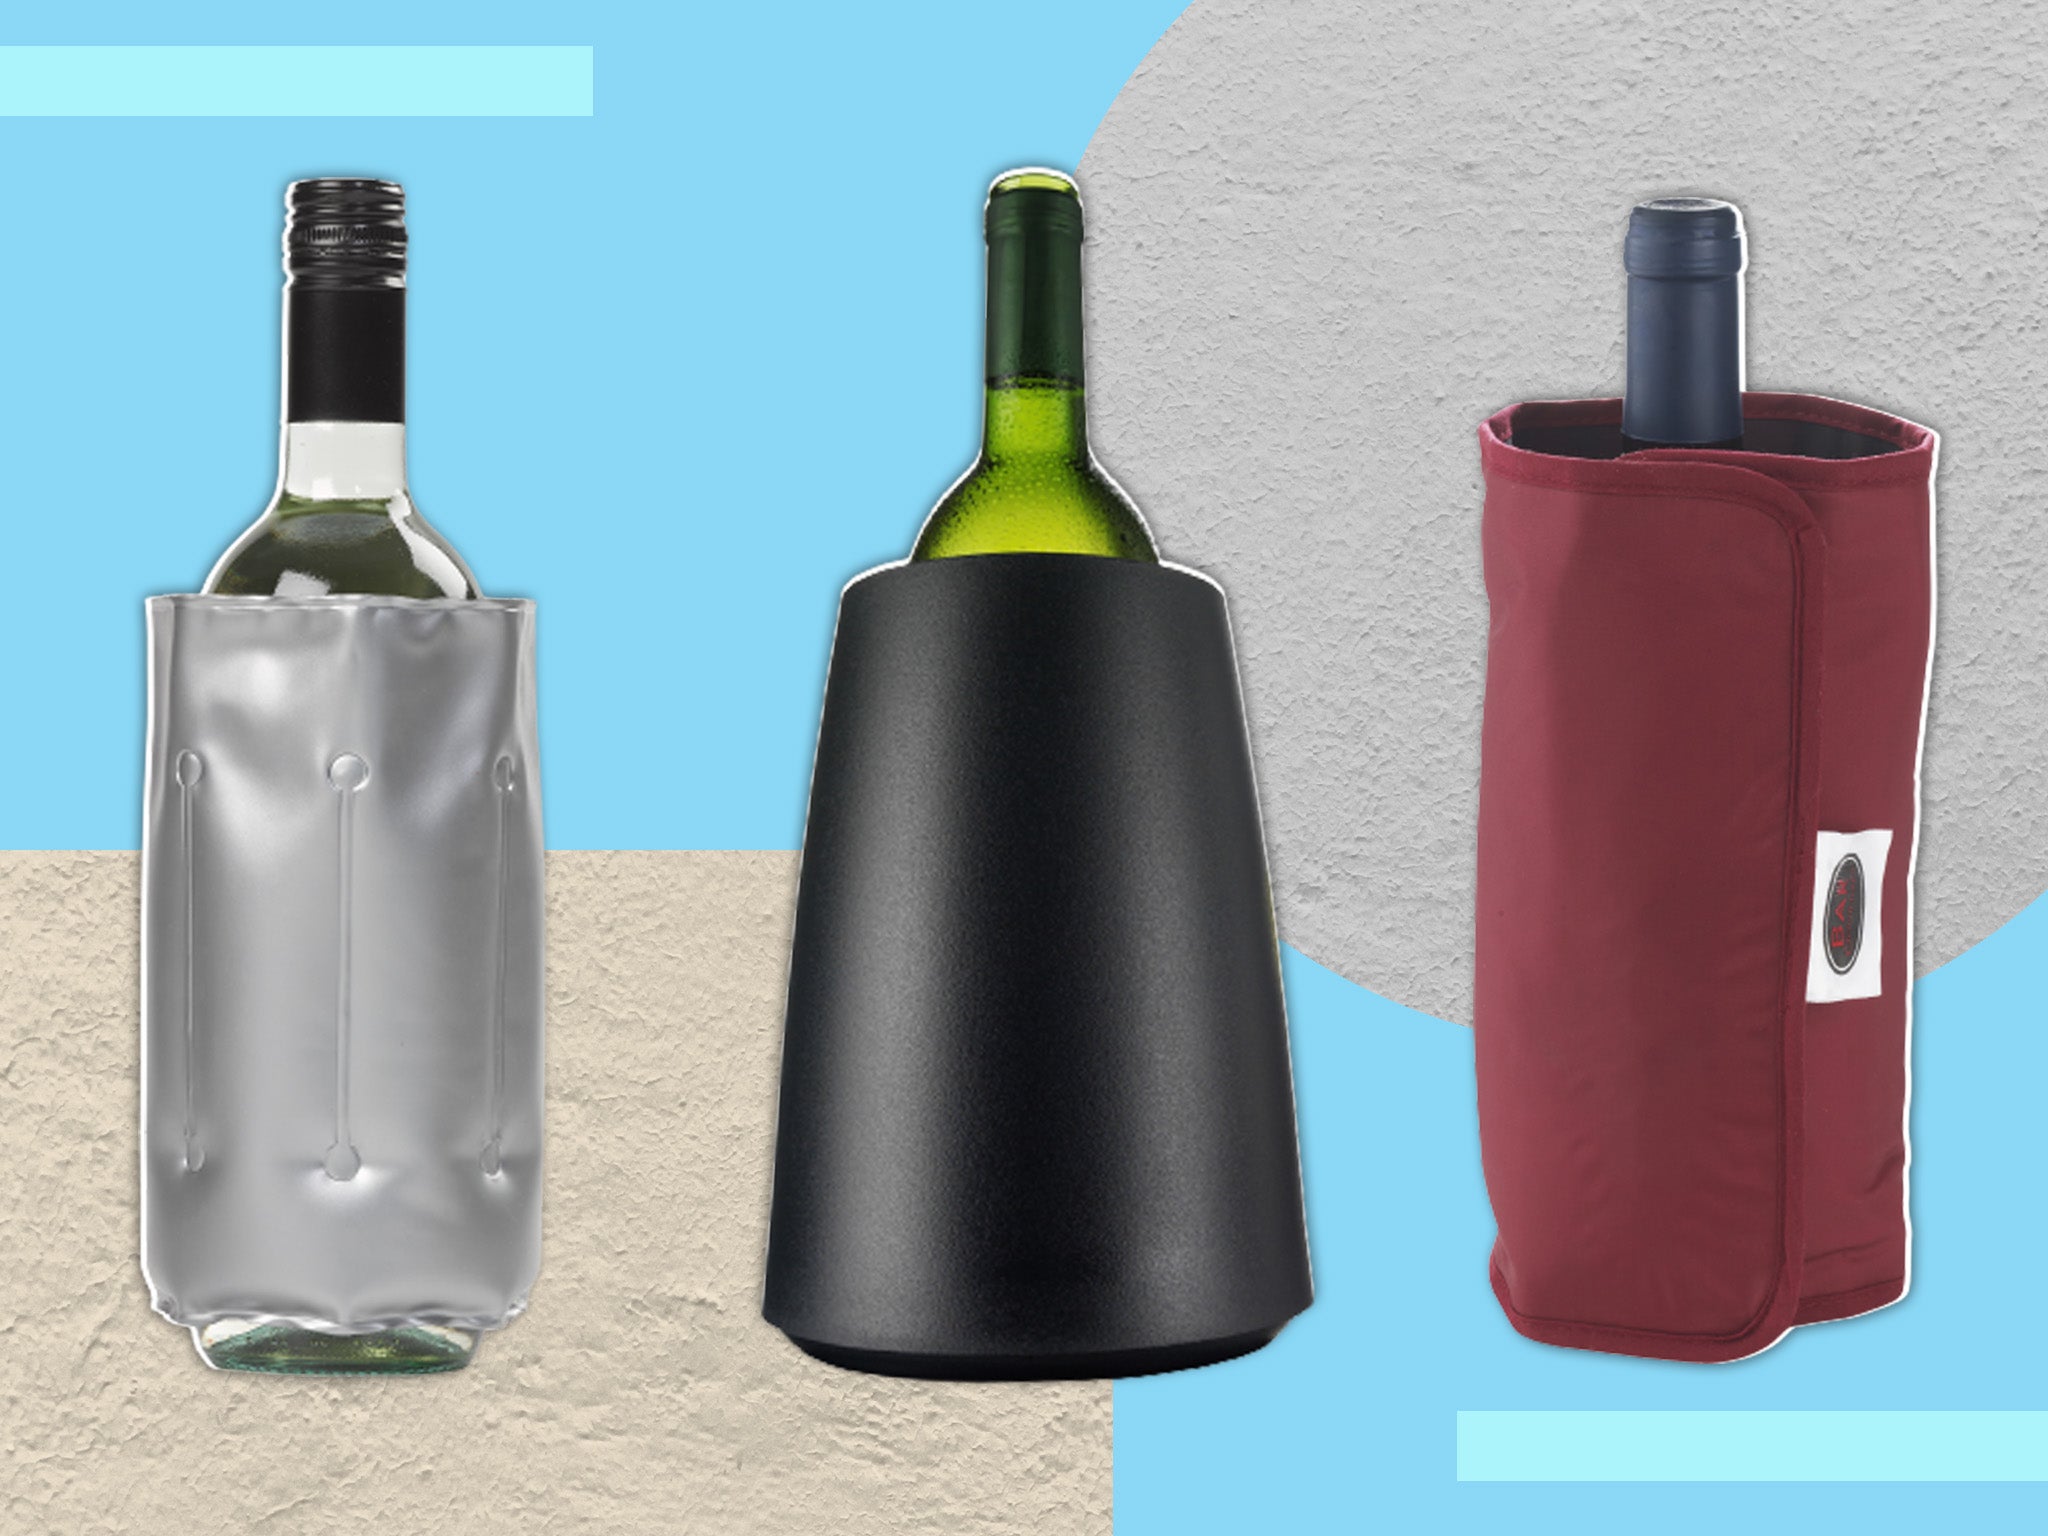 Ice Bag Carrier with Handles for White Wine Champagne The Chiller: Wine Chiller and Ice Bucket Cold Beer and Chilled Beverages